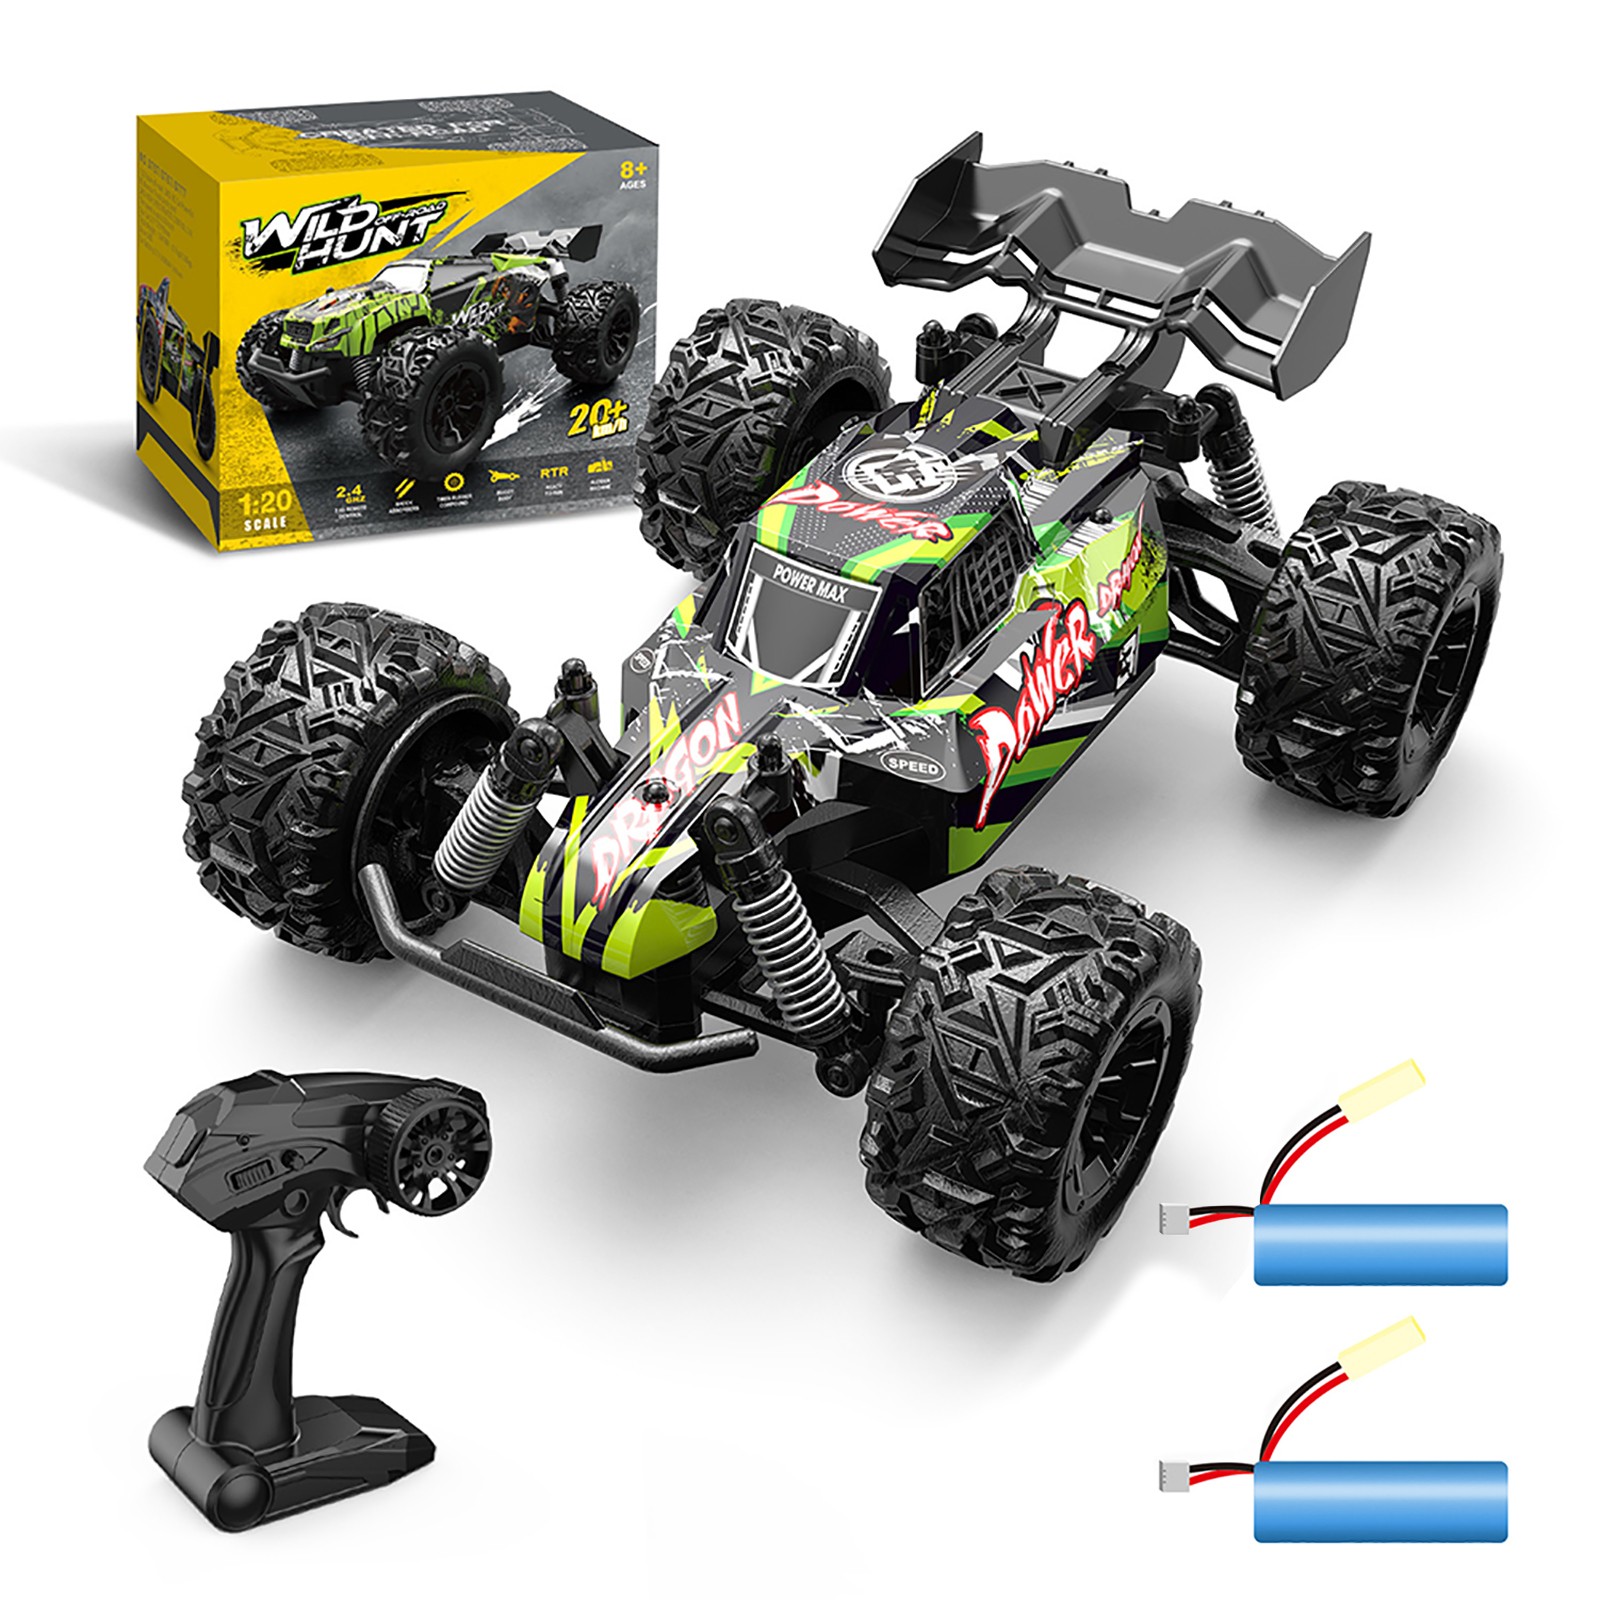 1:20 RC Car 4WD 20km/h High Speed Racing Drift Car Remote Control Off-road Vehicle Toys S757 Green 1 Battery